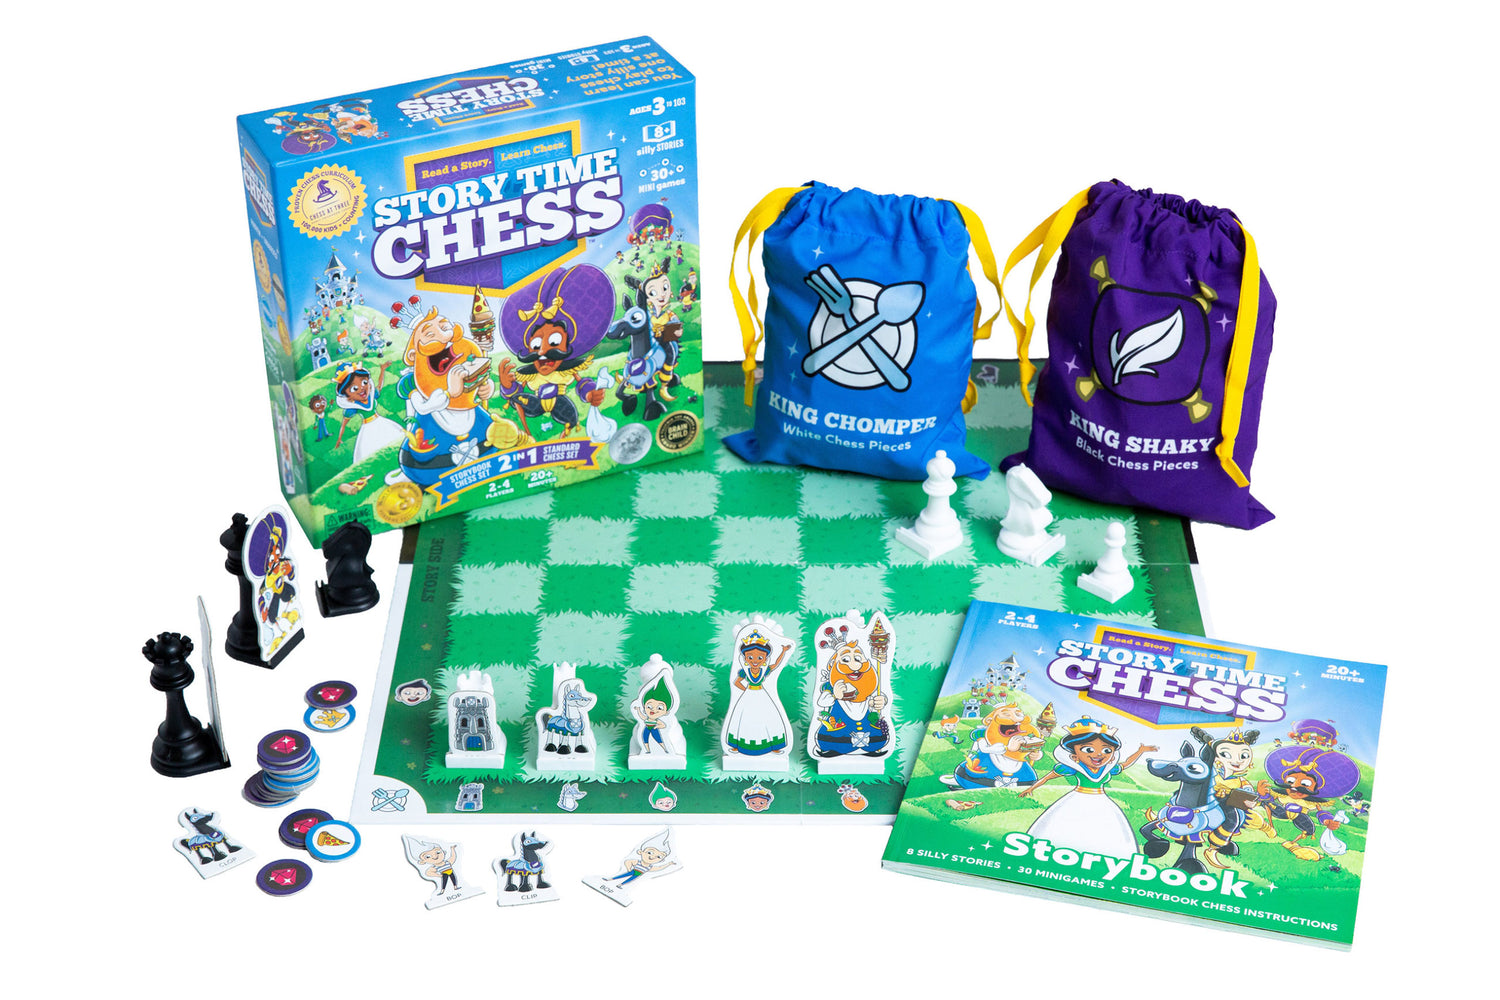 Story Time Chess game contents